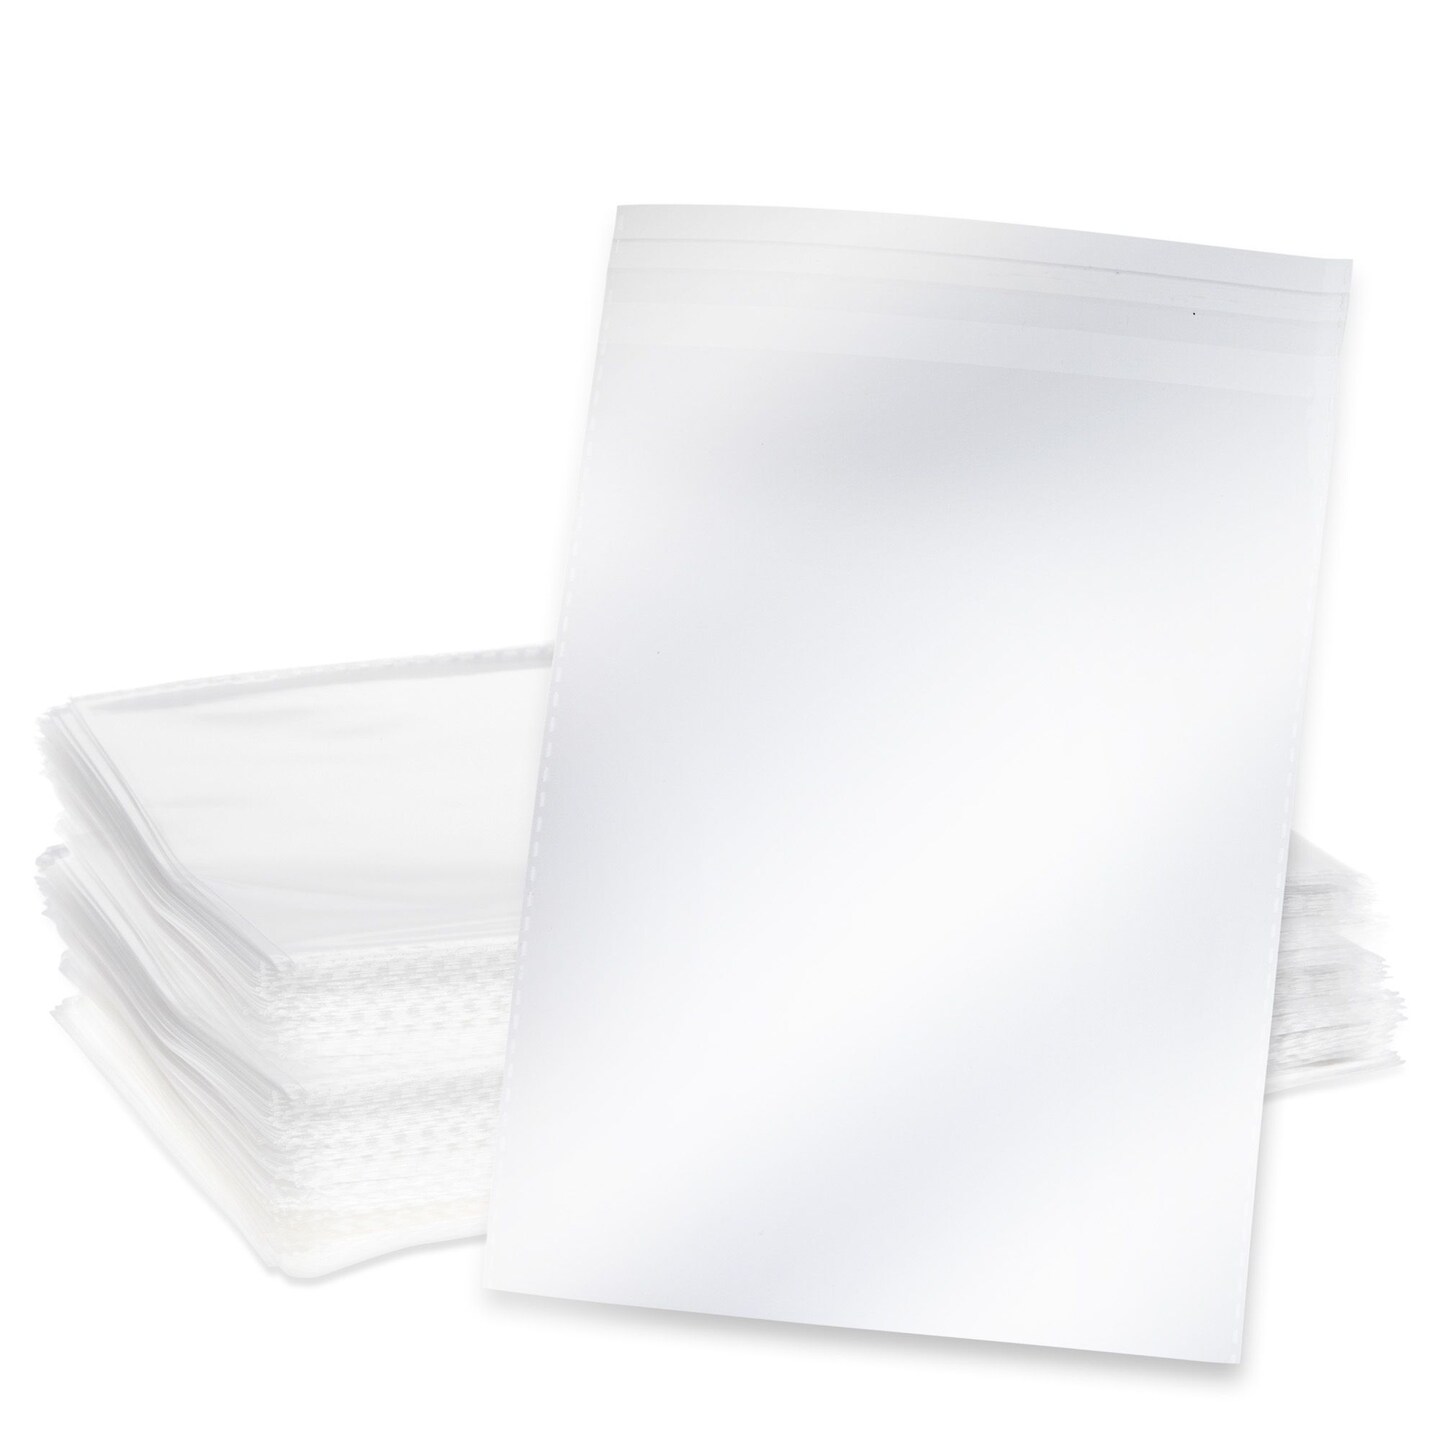 300 Pack Clear Greeting Card Sleeves, Transparent Envelopes for 5x7 Invitations, Photos (7.6 x 5.7 In)